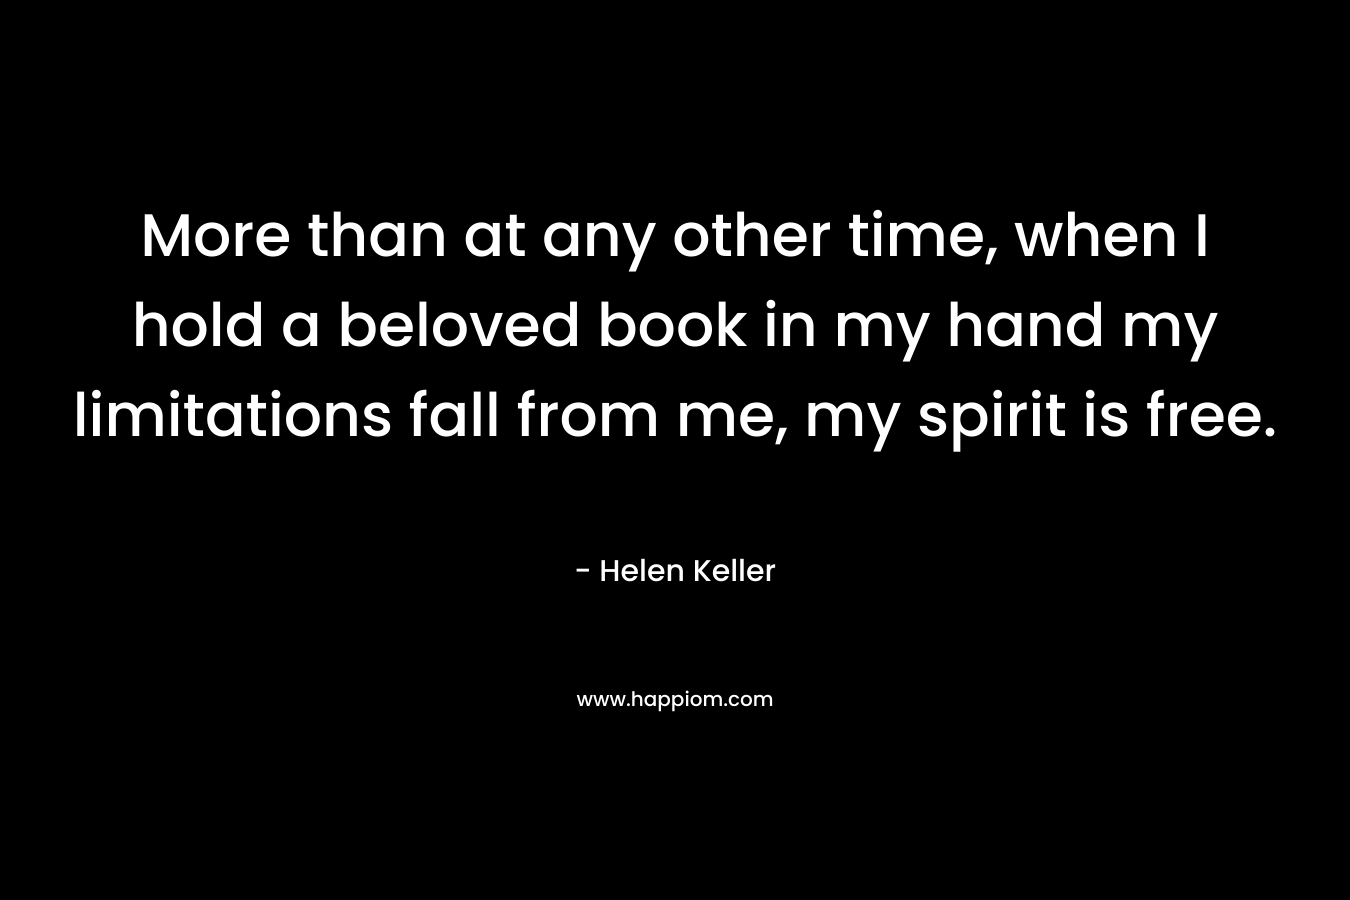 More than at any other time, when I hold a beloved book in my hand my limitations fall from me, my spirit is free.